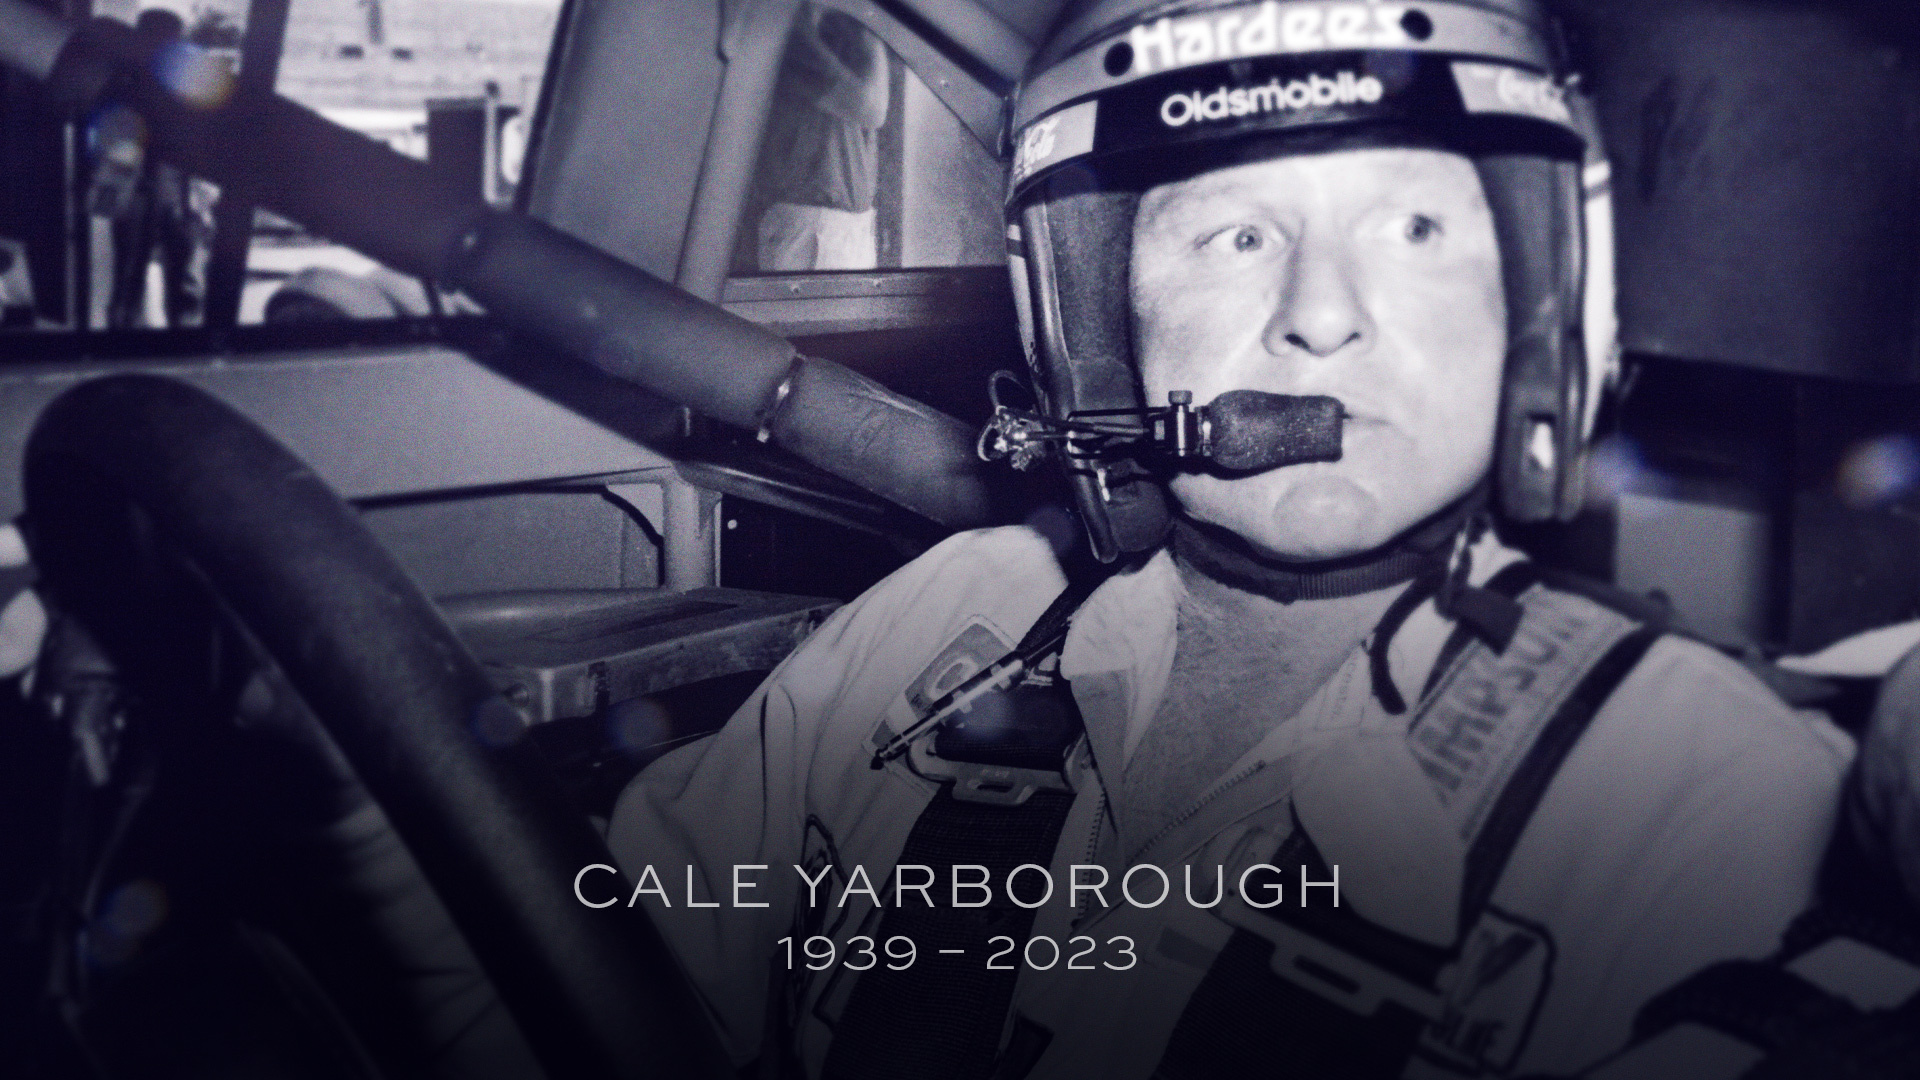 Cale Yarborough, NASCAR legend who won 3 straight titles, dies at age 84